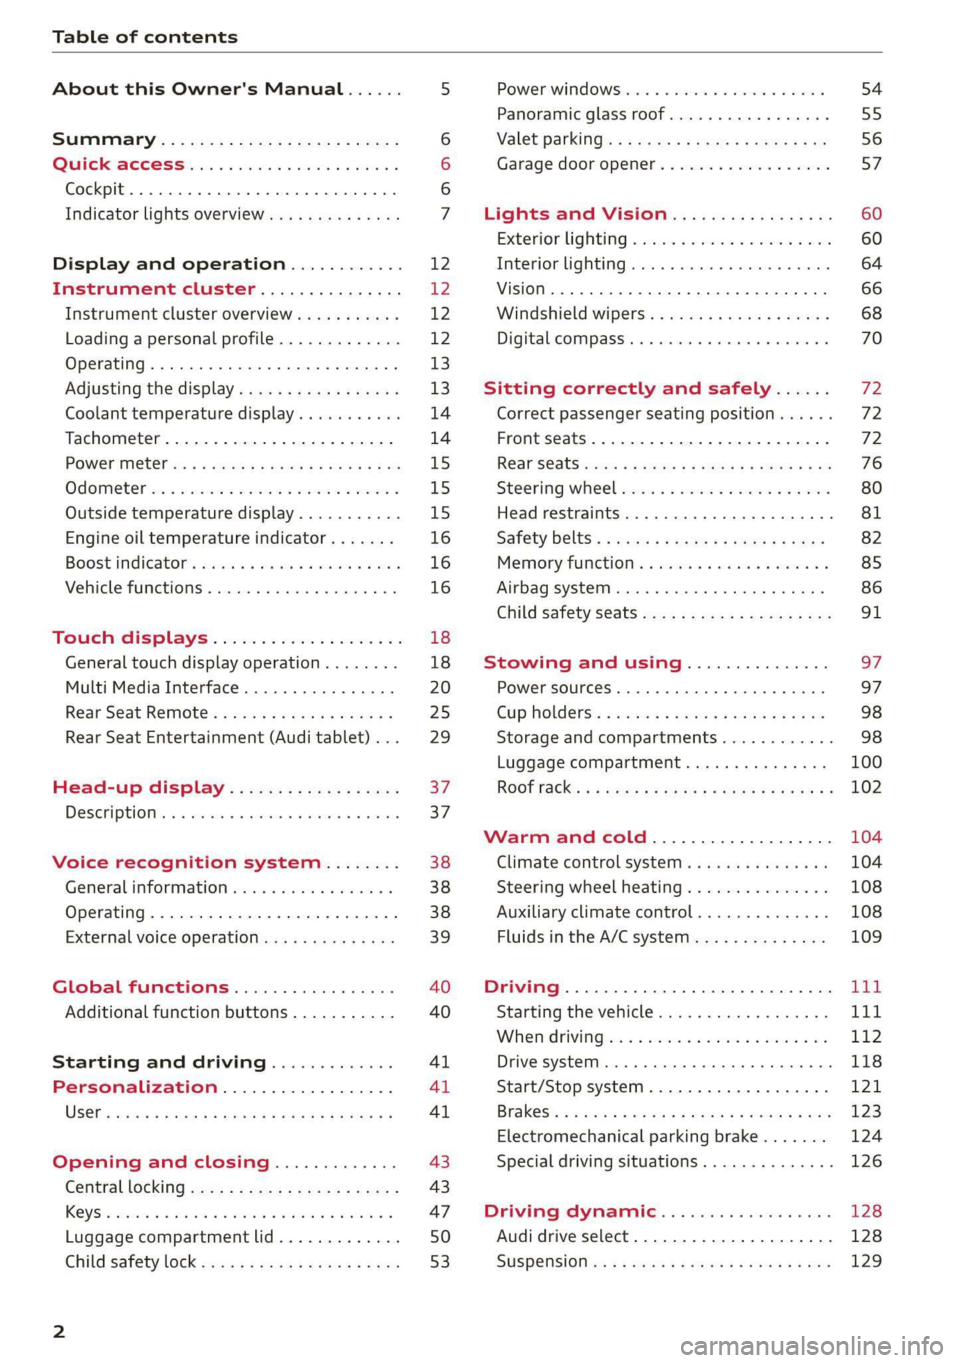 AUDI A8 2020  Owners Manual Table of contents 
  
About this Owner's Manual...... 
SUMIMALY: ; « ss6% : osen ss sean cs poe s 
QC CCeS Skis: si esis a  6 ores os ewe 
Cockpit... 2... ee eee eee eee 
Indicator lights overvie